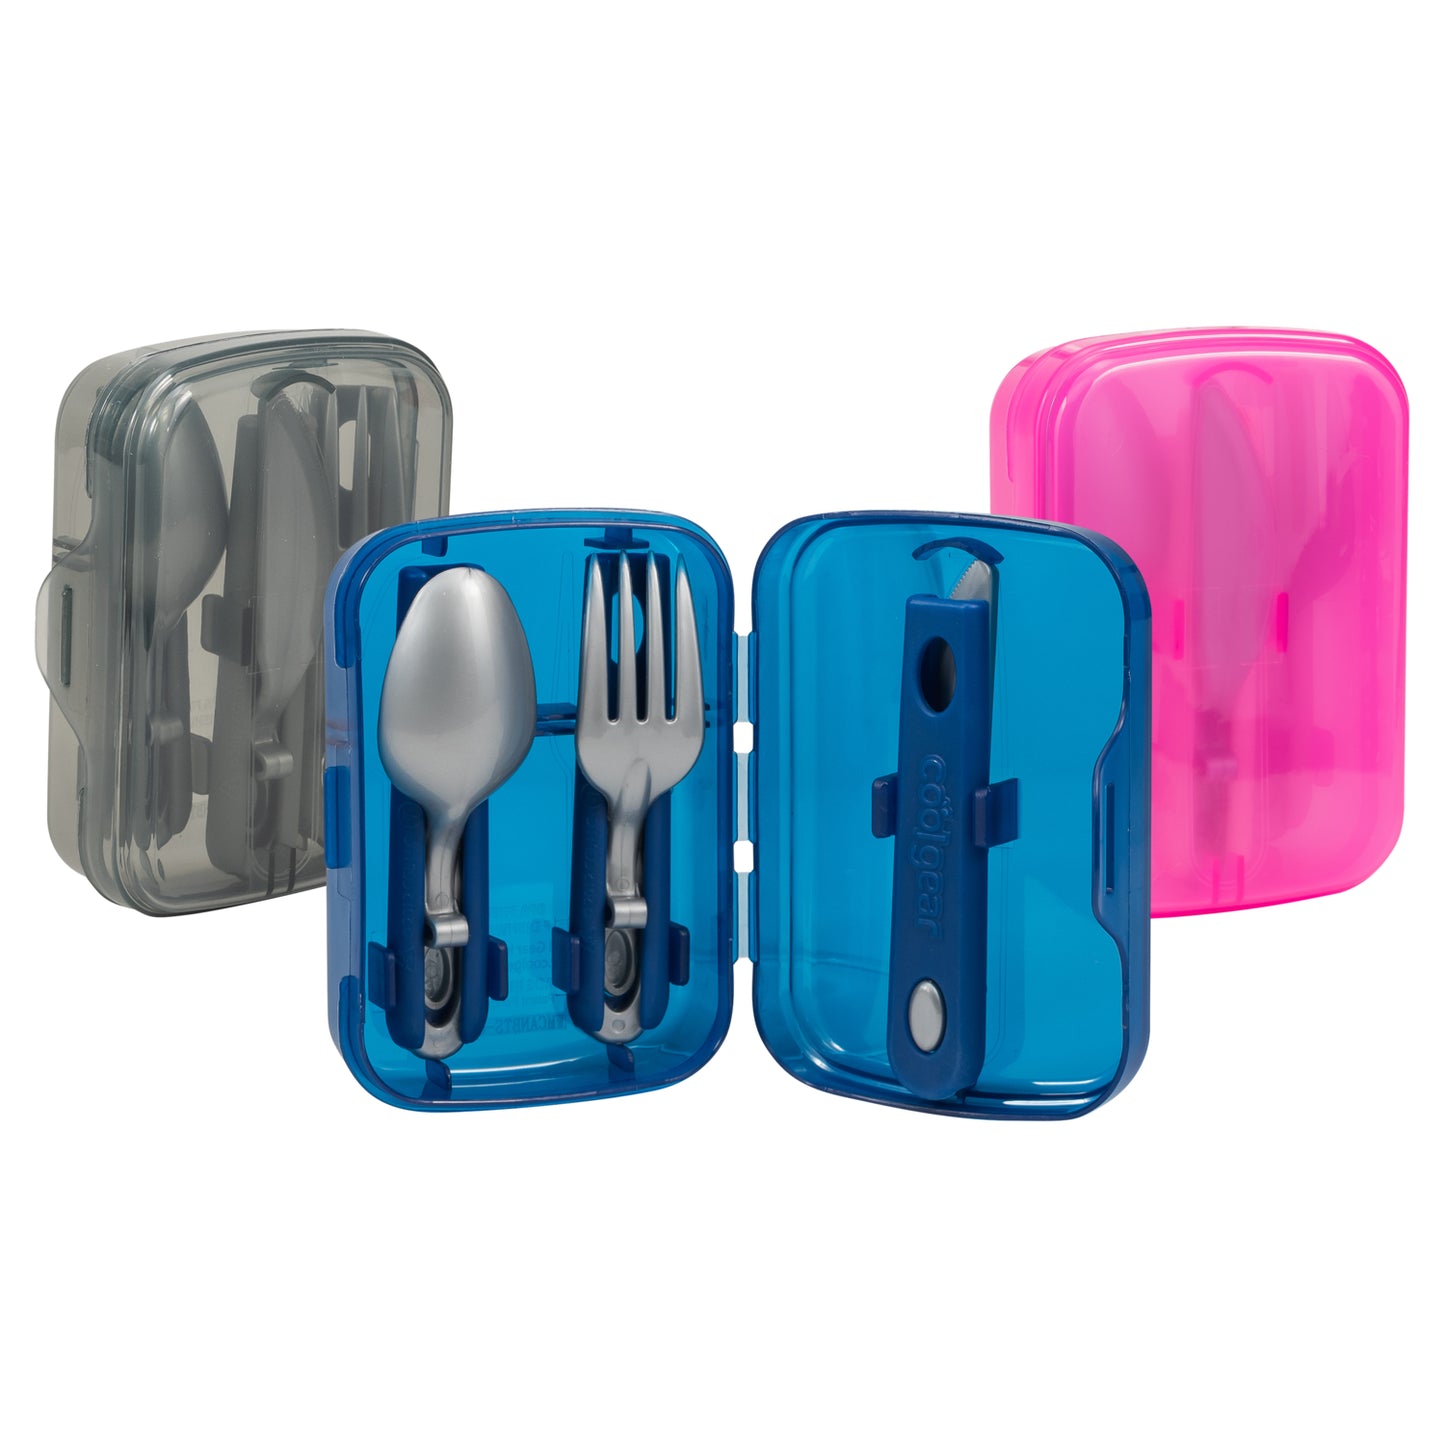 Cool Gear 3-Pack Travel Reusable Utensil Set with Slider Carry Case | Portable Knife, Fork, Spoon Silverware, Eco-Friendly Cutlery for Camping, Picnics, Kids & Adults - Gray, Pink, & Blue